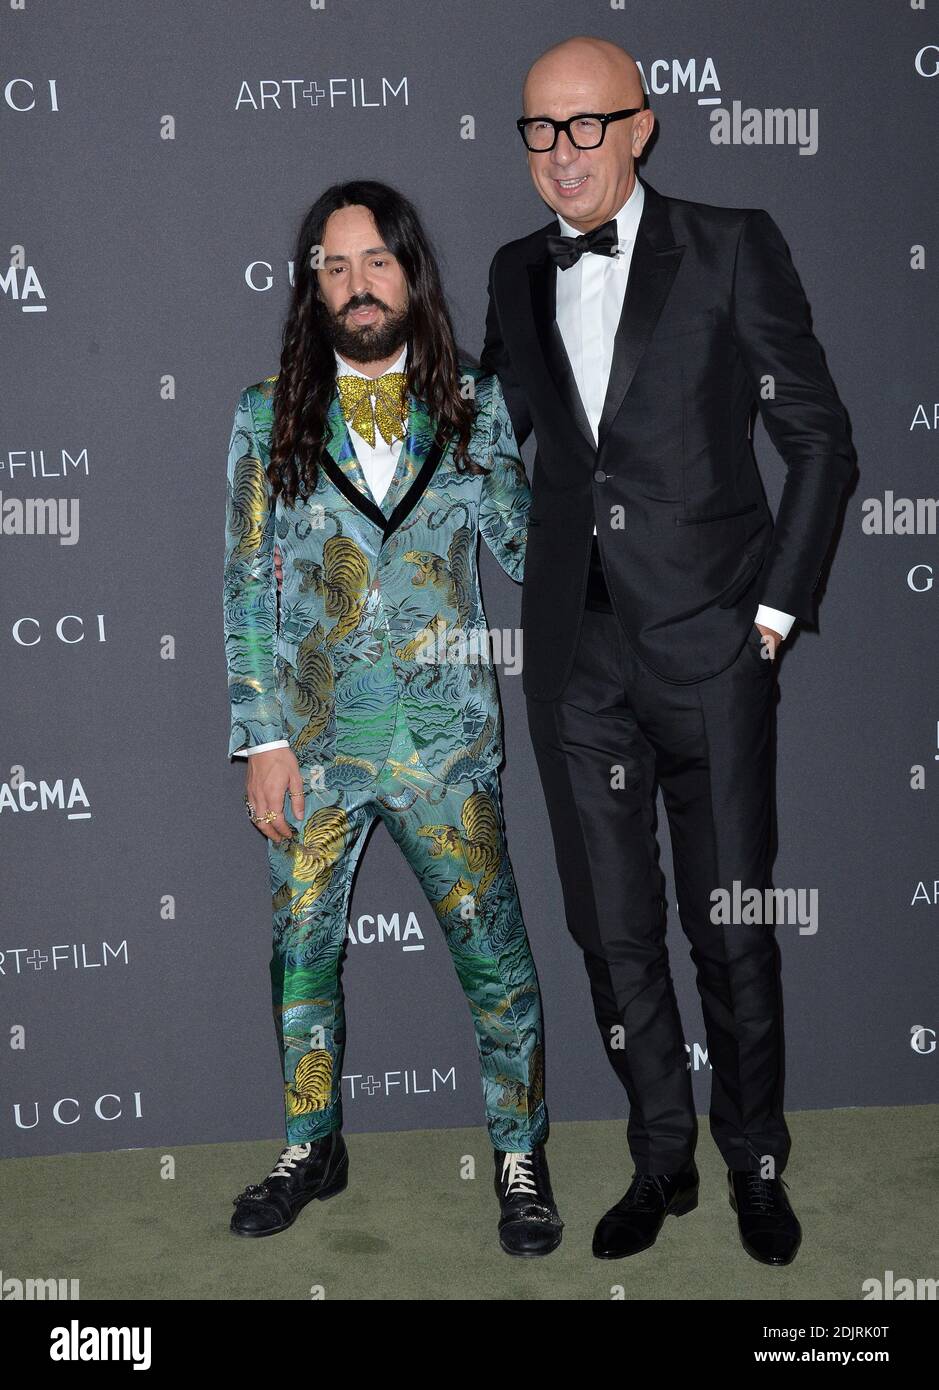 Alessandro Michele and Marco Bizzarri attend the 2016 LACMA Art + Film Gala  honoring Robert Irwin and Kathryn Bigelow presented by Gucci at LACMA on  October 29, 2016 in Los Angeles, California.